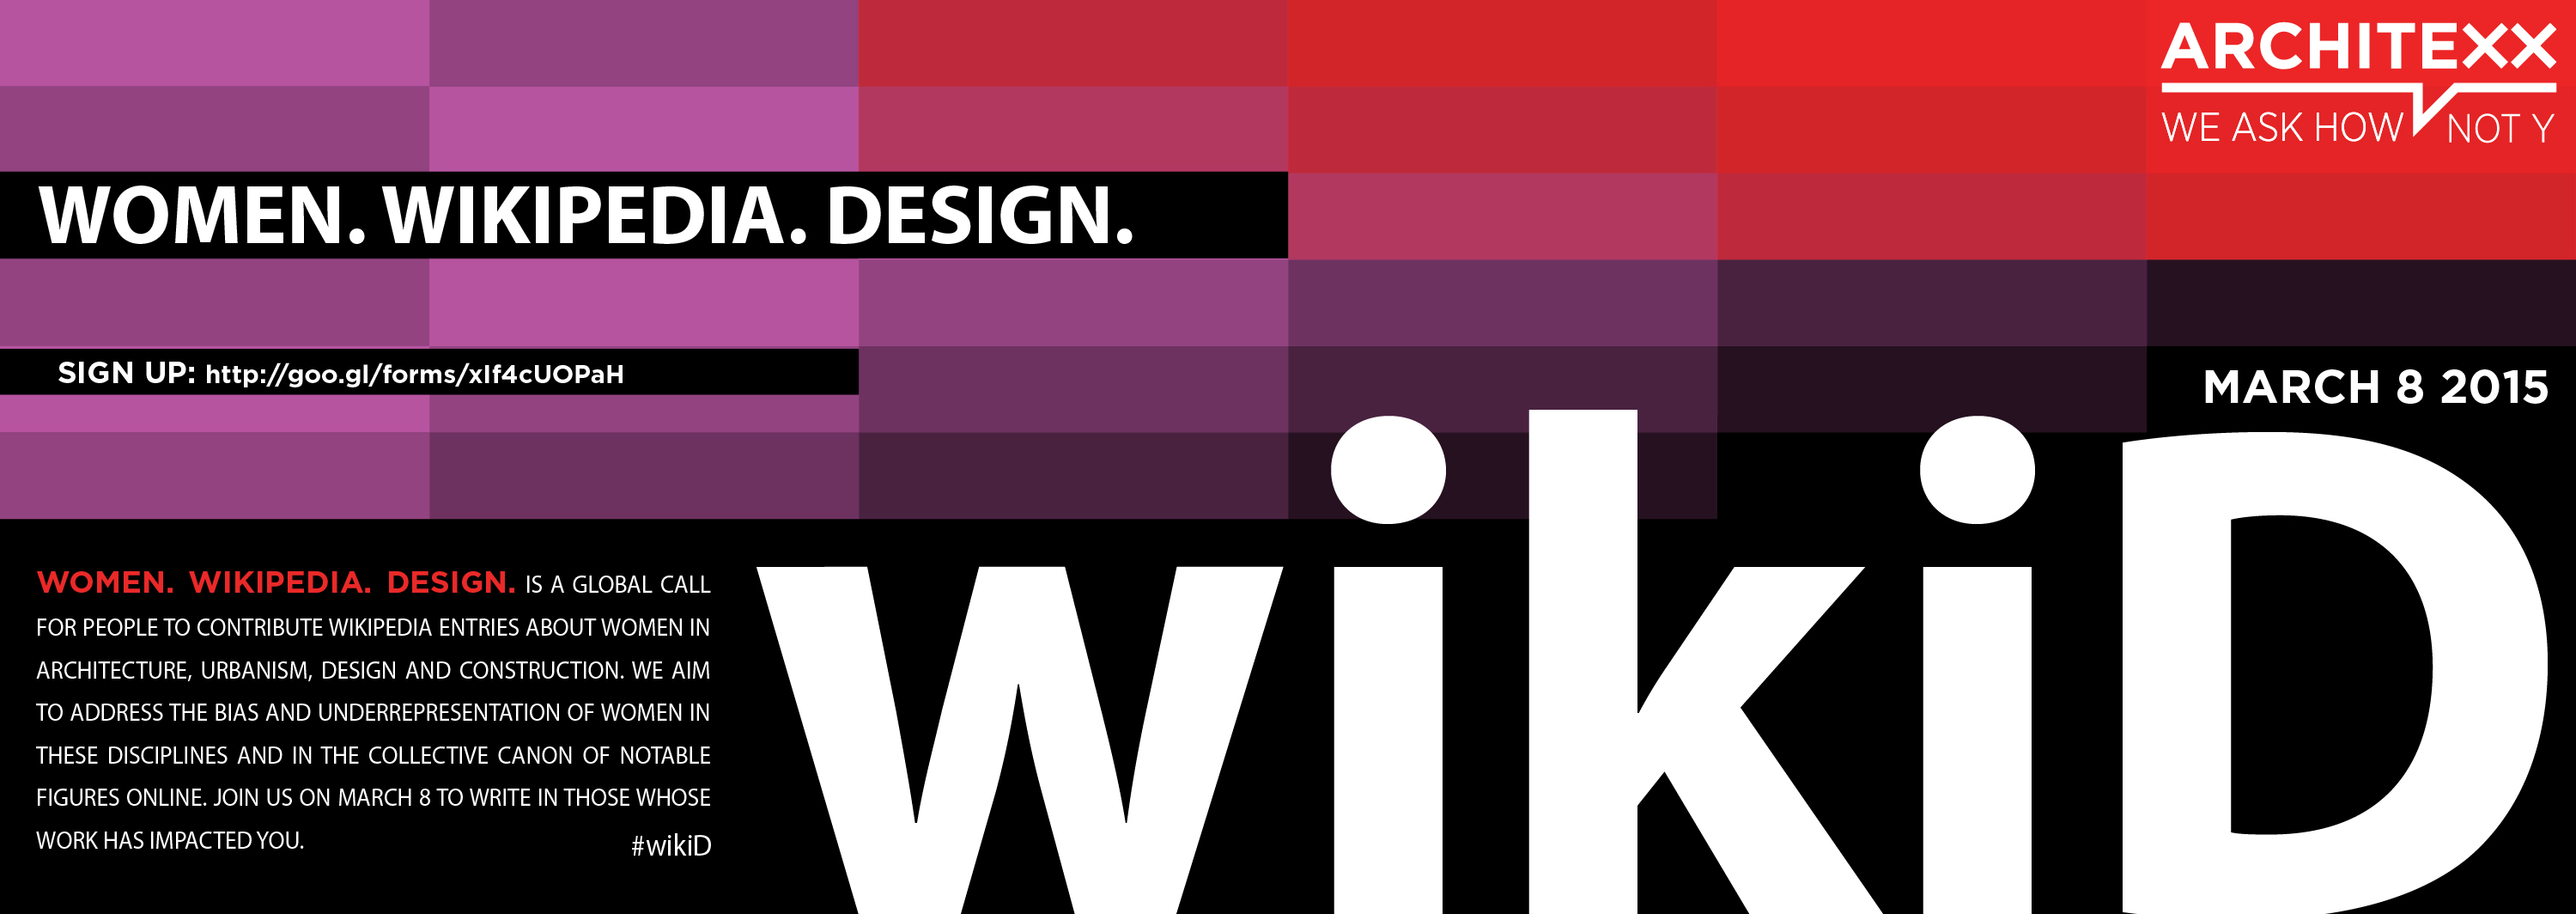 women. wikipedia. design. #wikiD: ArchiteXX’s Ongoing Campaign to Write Women Architects into One of the Internet’s Most Widely Consulted Databases